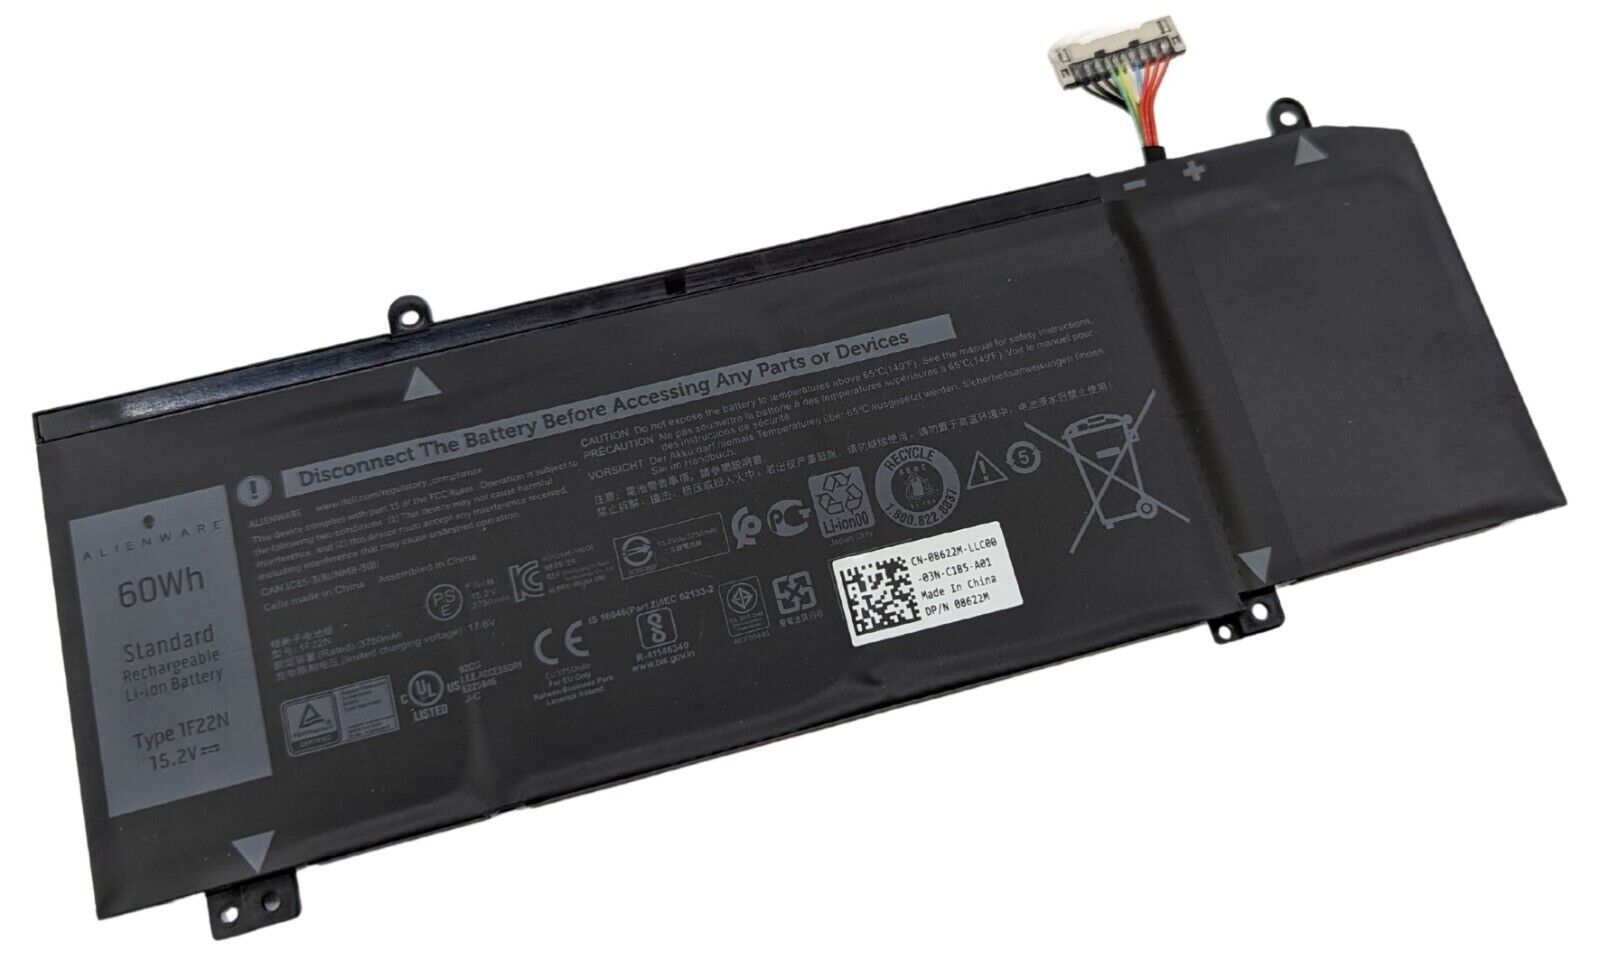 NEW Genuine Alienware M15 M17 G7 7790 60Wh 4-cell Laptop Battery - 1F22N 01F22N - $49.95